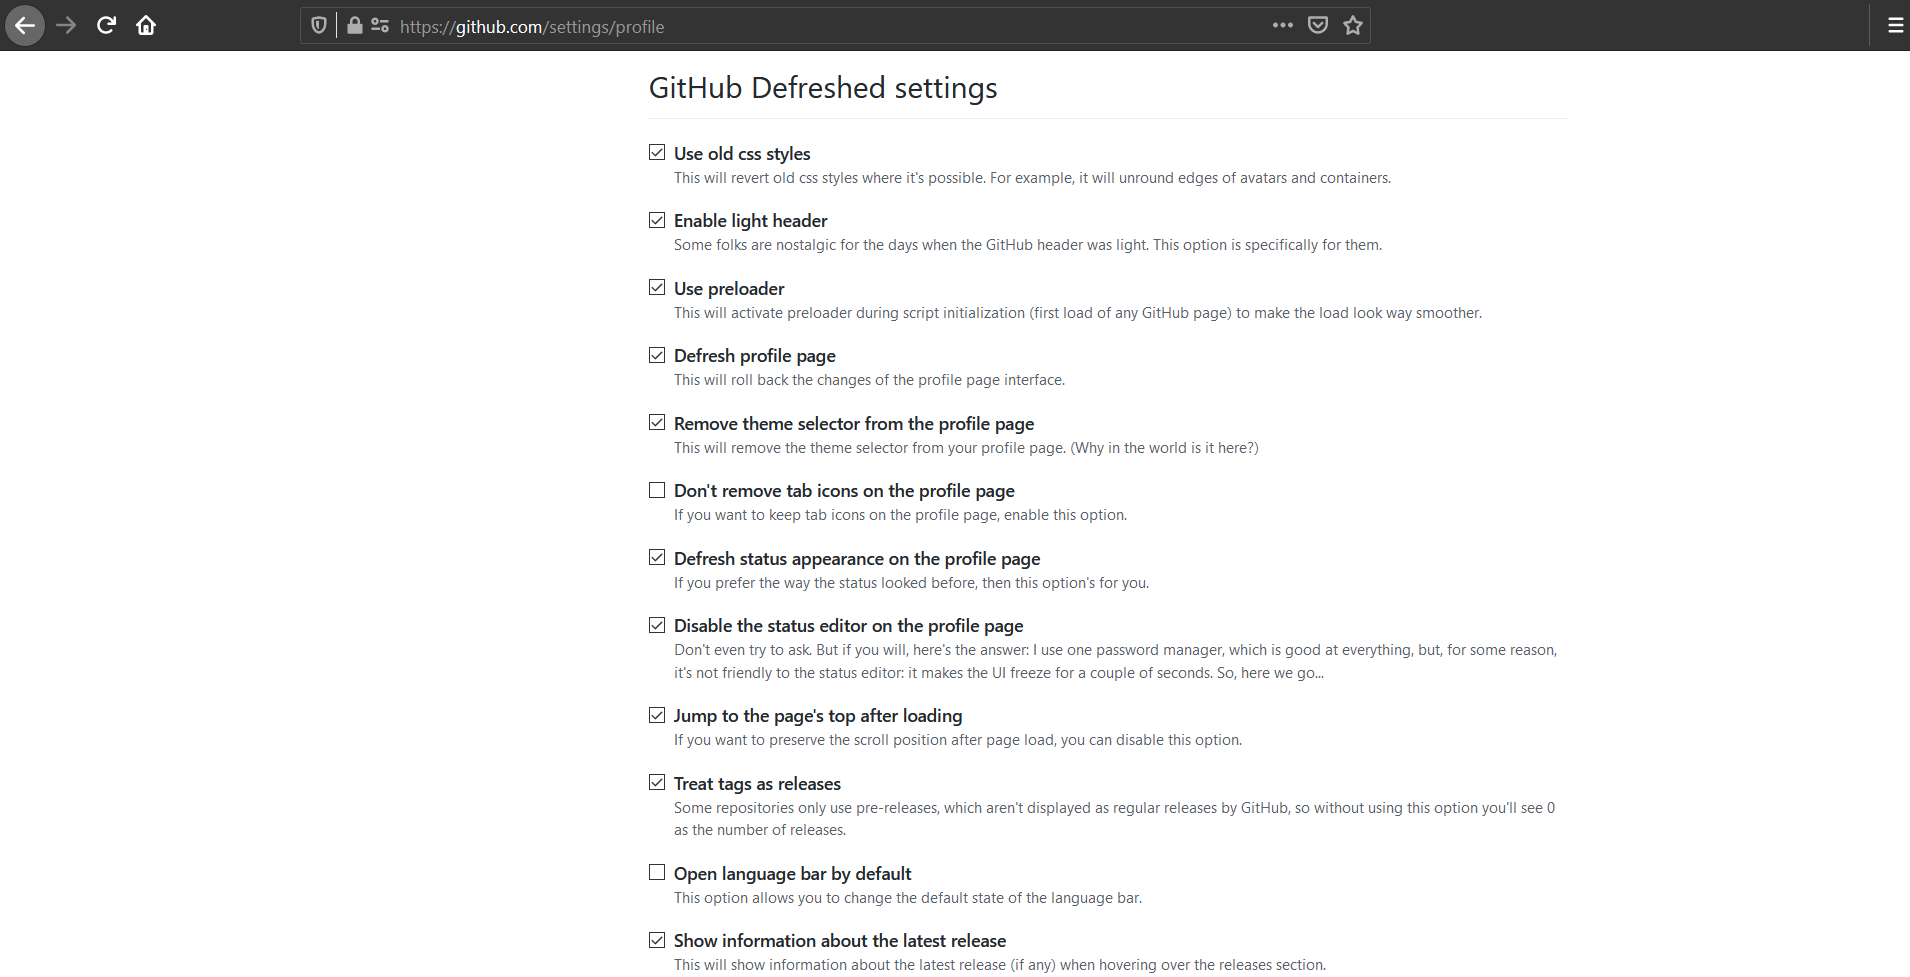 Preview of the GitHub Defreshed's settings